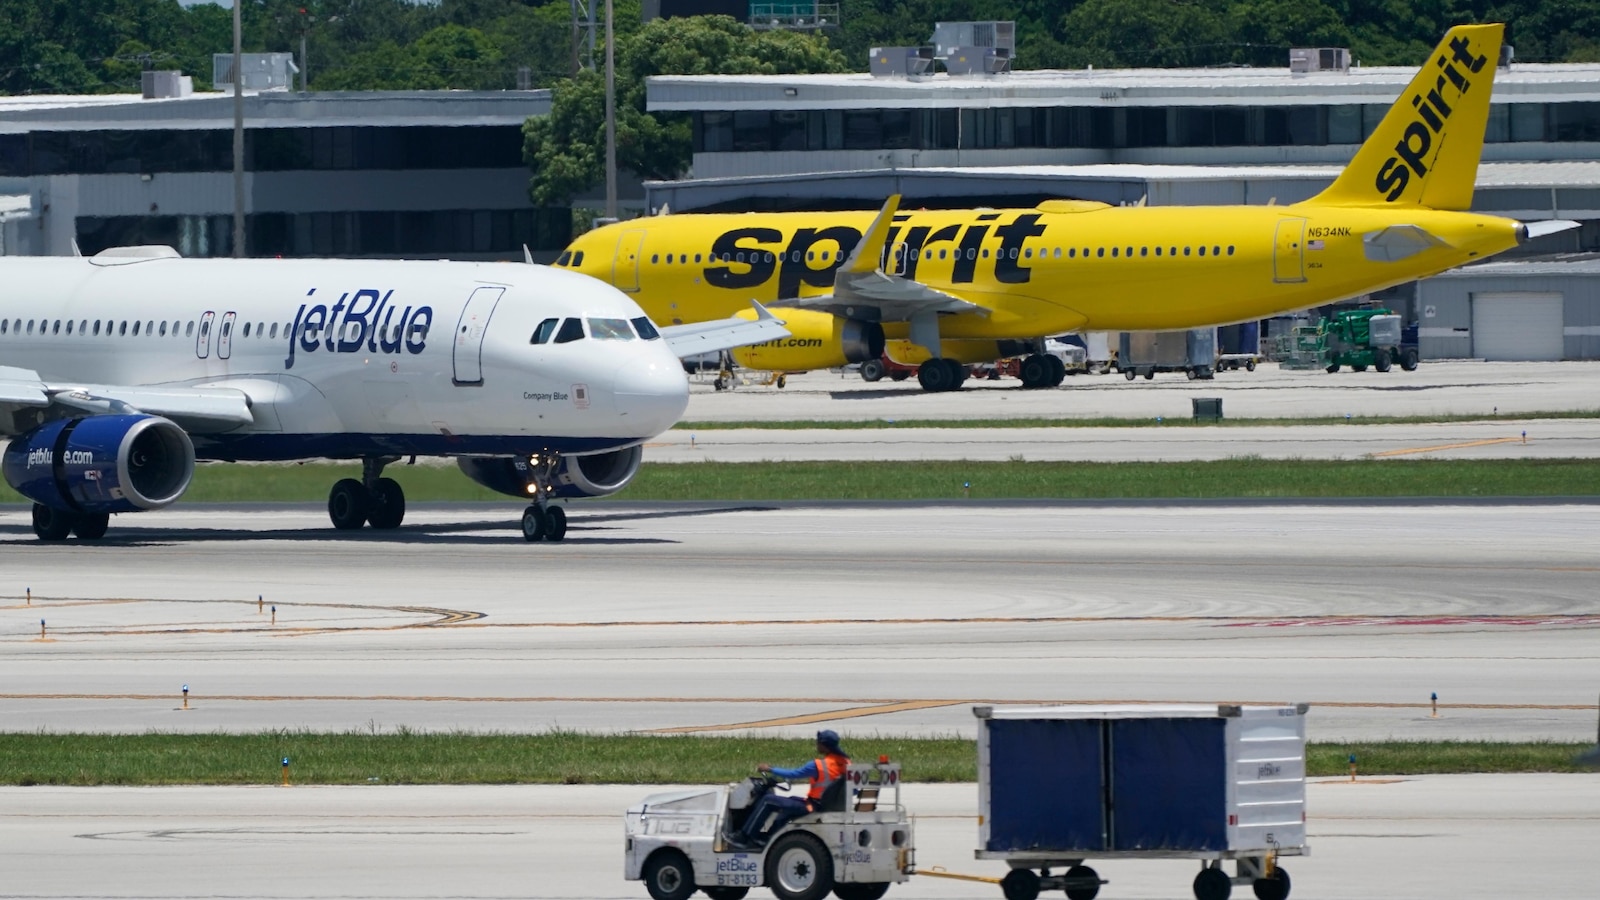 JetBlue and Spirit Airlines terminate $3.8 billion merger following court ruling preventing the combination